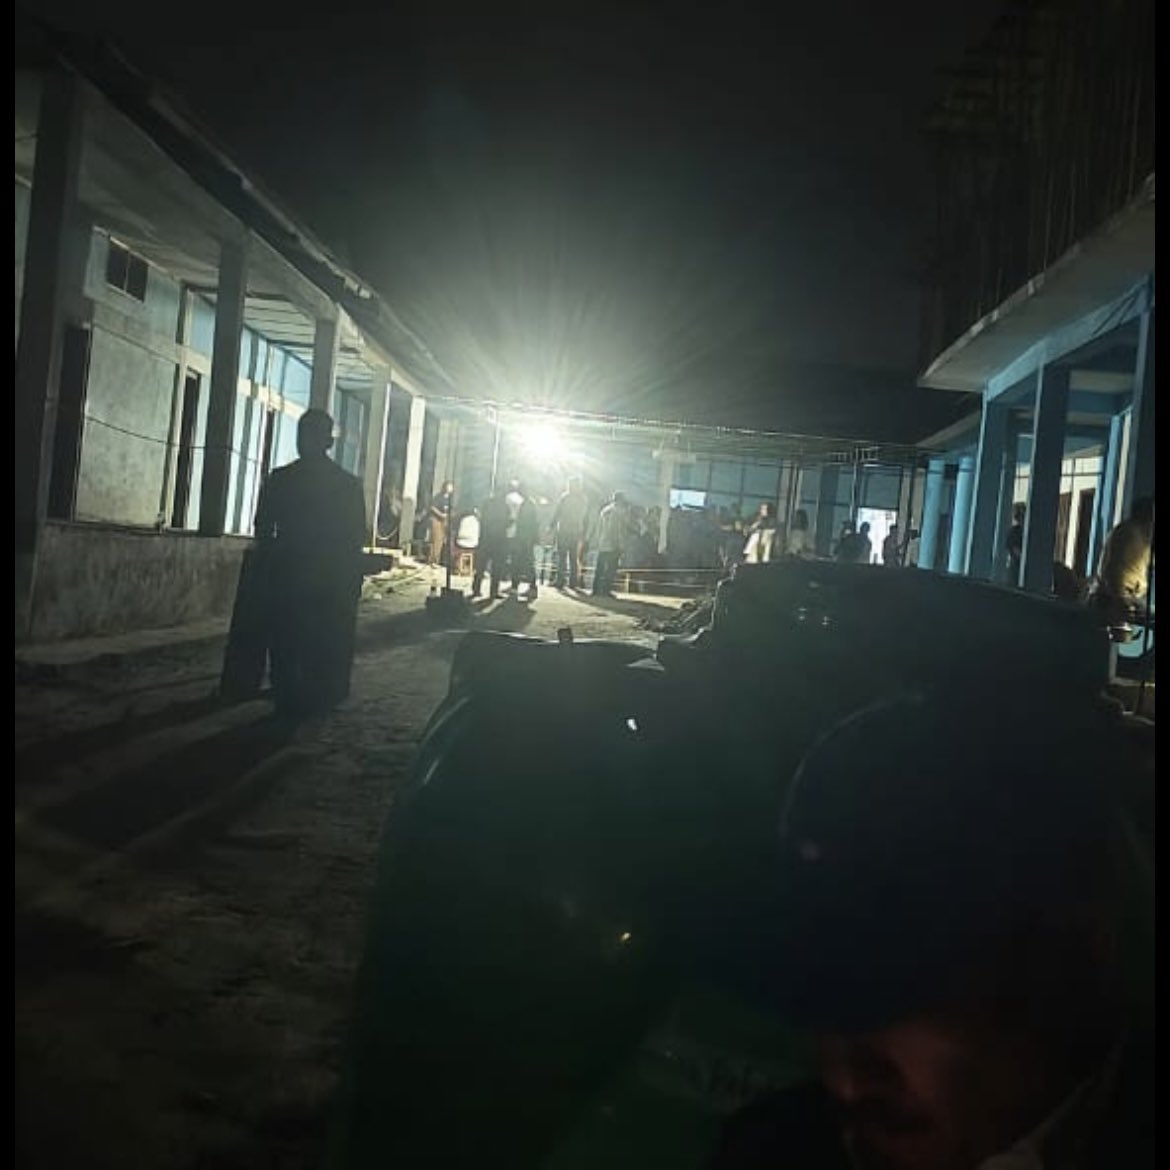 Most polling stations with barely 1000 voters pulled an all-nighter in Basar Constituency of Leparada district in Arunachal; in one, voting completed at 4AM of April 20. This should be a case study for @ECISVEEP @ceoarunachal